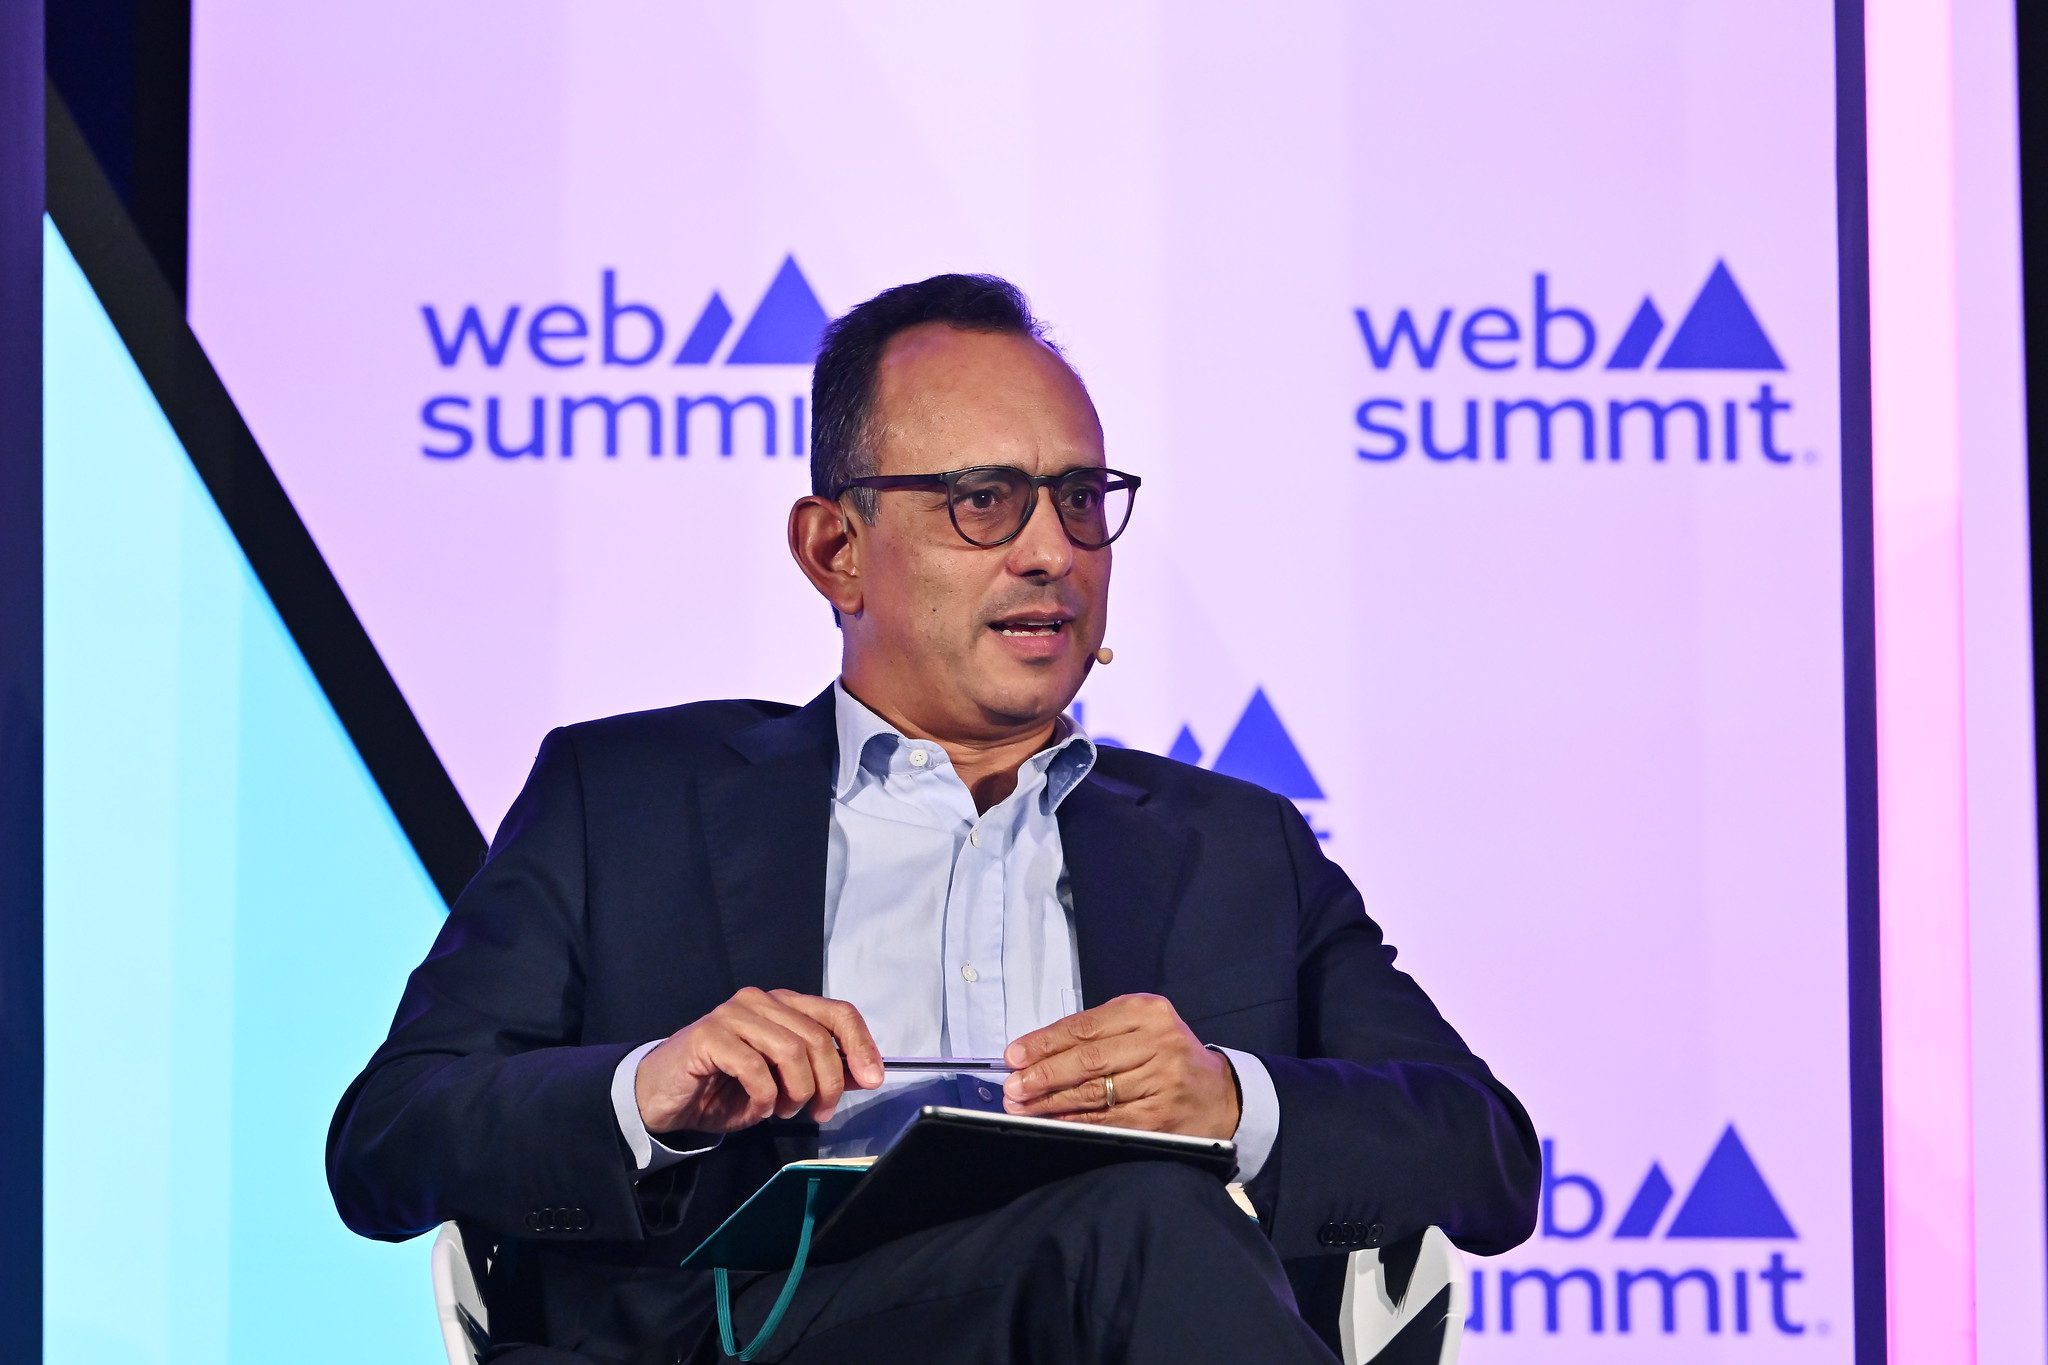 Ricardo Costa, Editor-in-chief, Sociedade Independente de Comunicação (SIC), on Fourth Estate Stage during day one of Web Summit 2023 at the Altice Arena in Lisbon